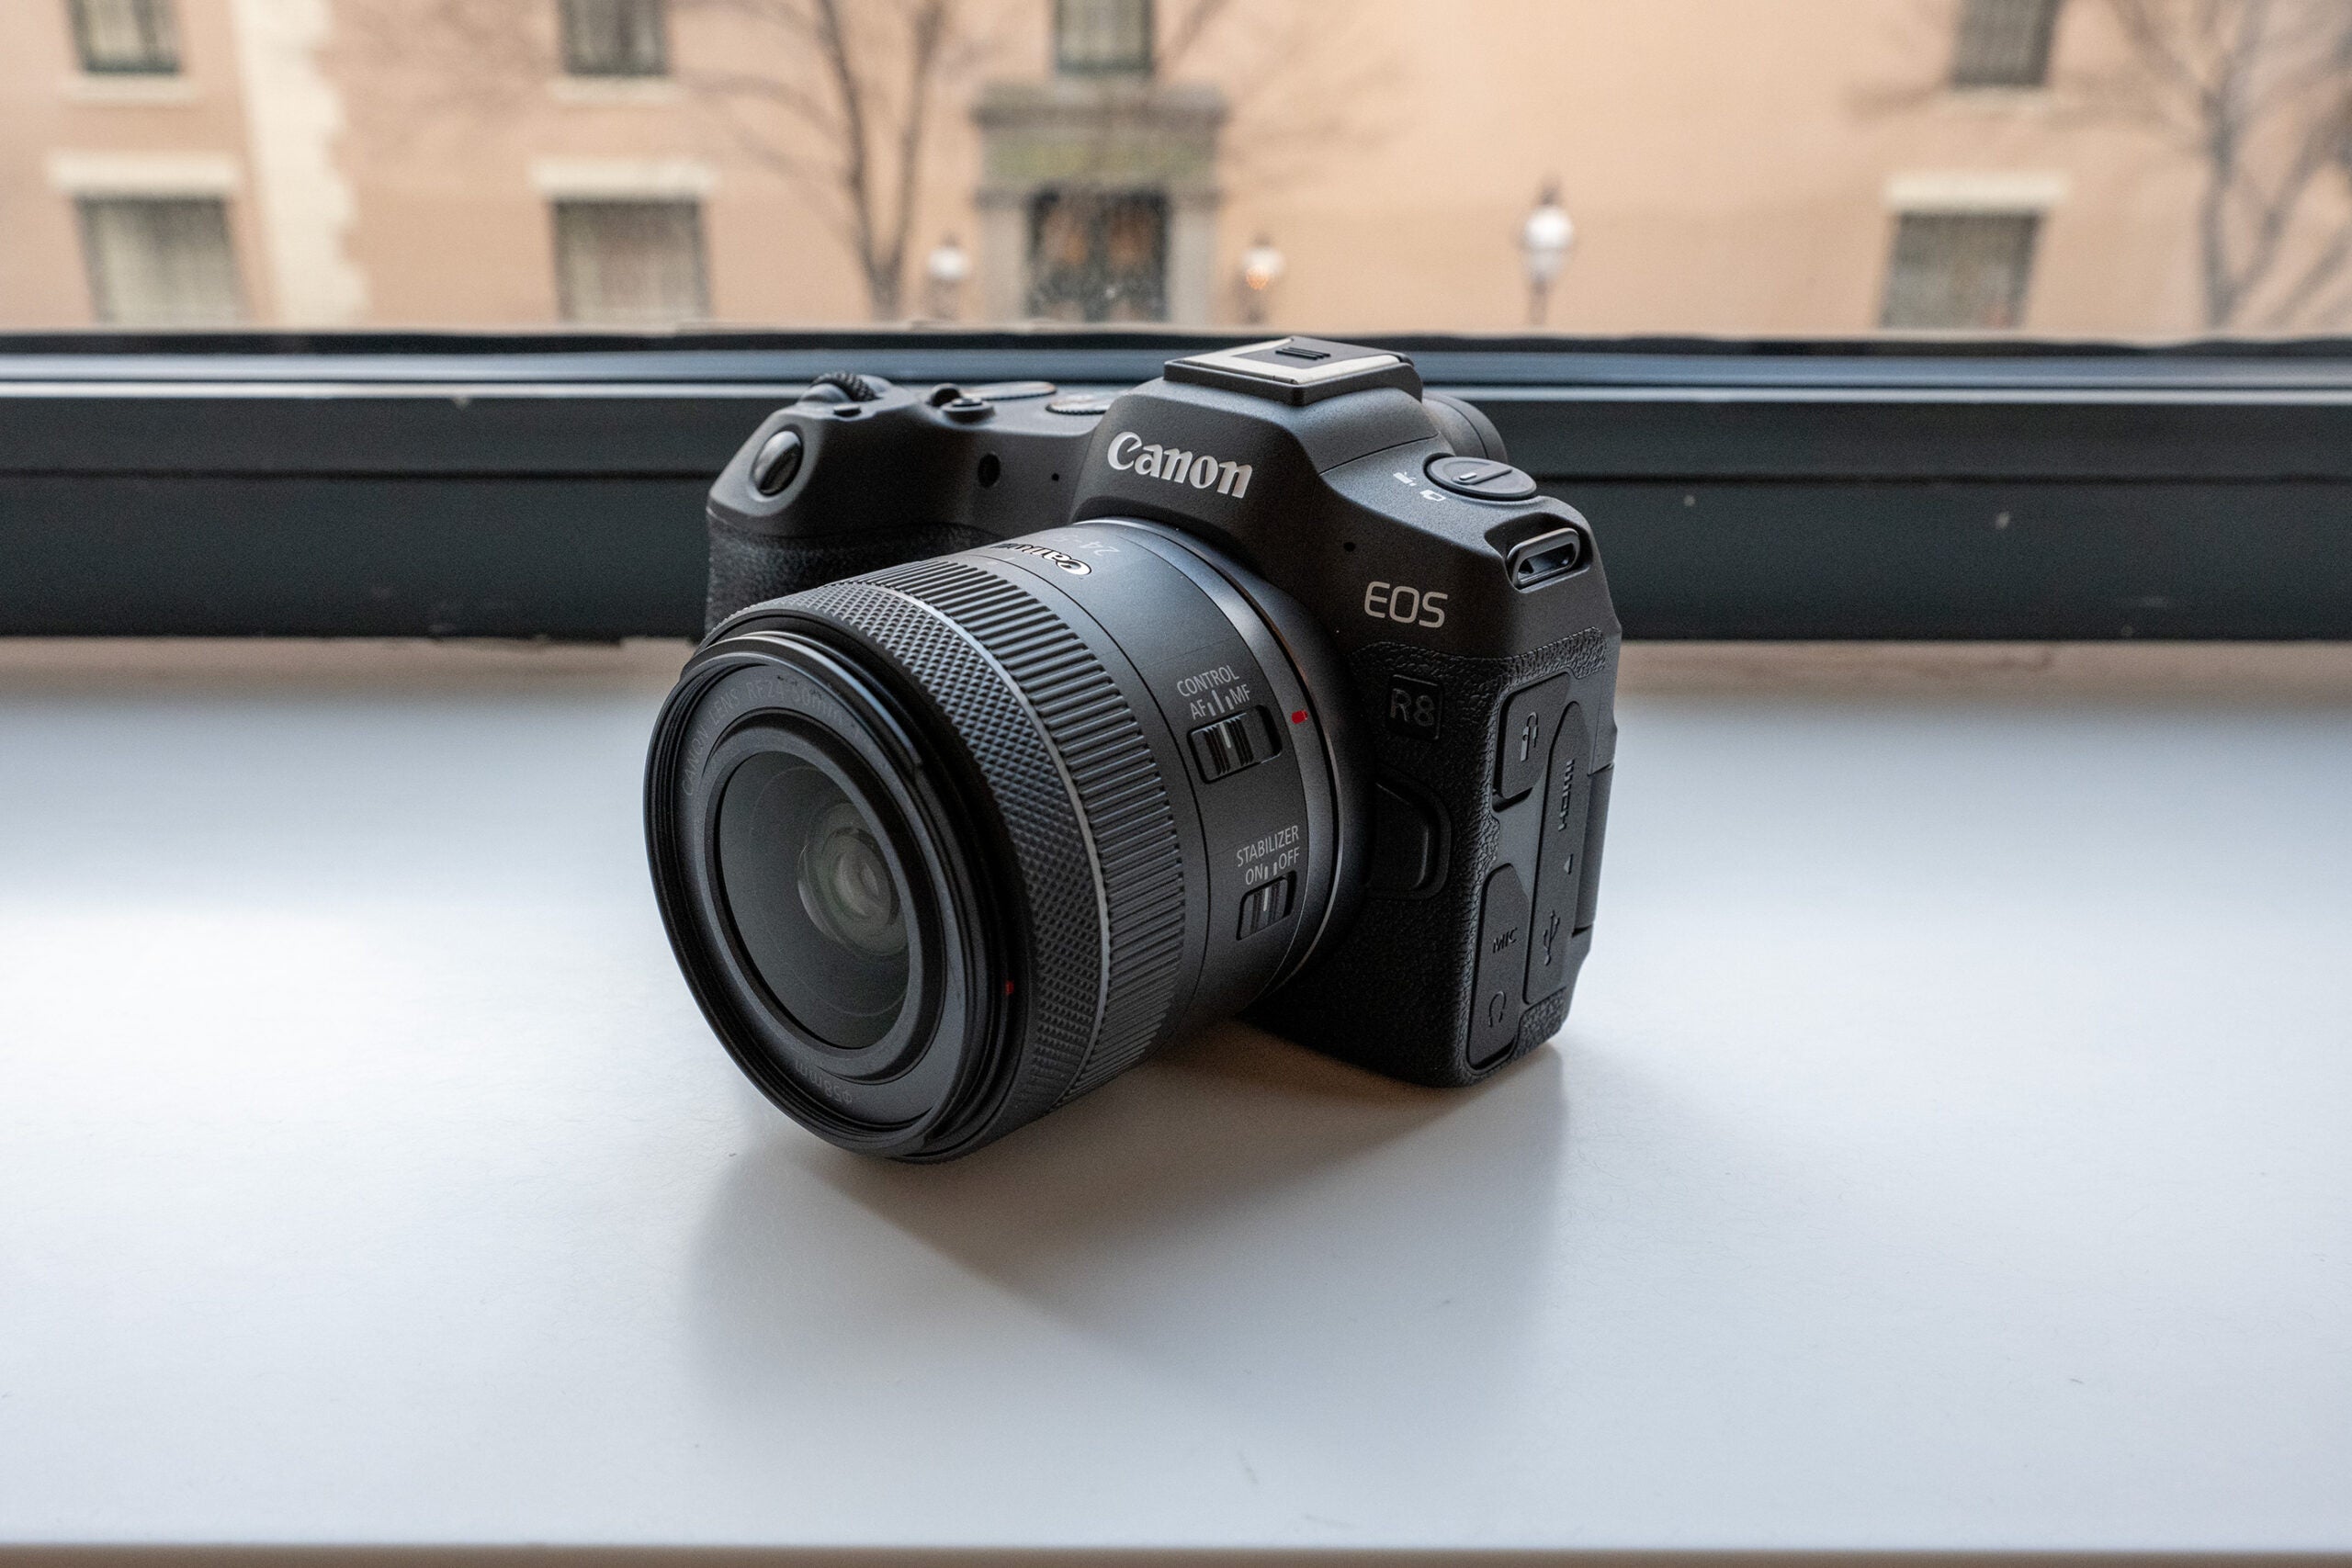 Canon EOS R8 with the RF24-50mm F4.5-6.3 IS STM lens